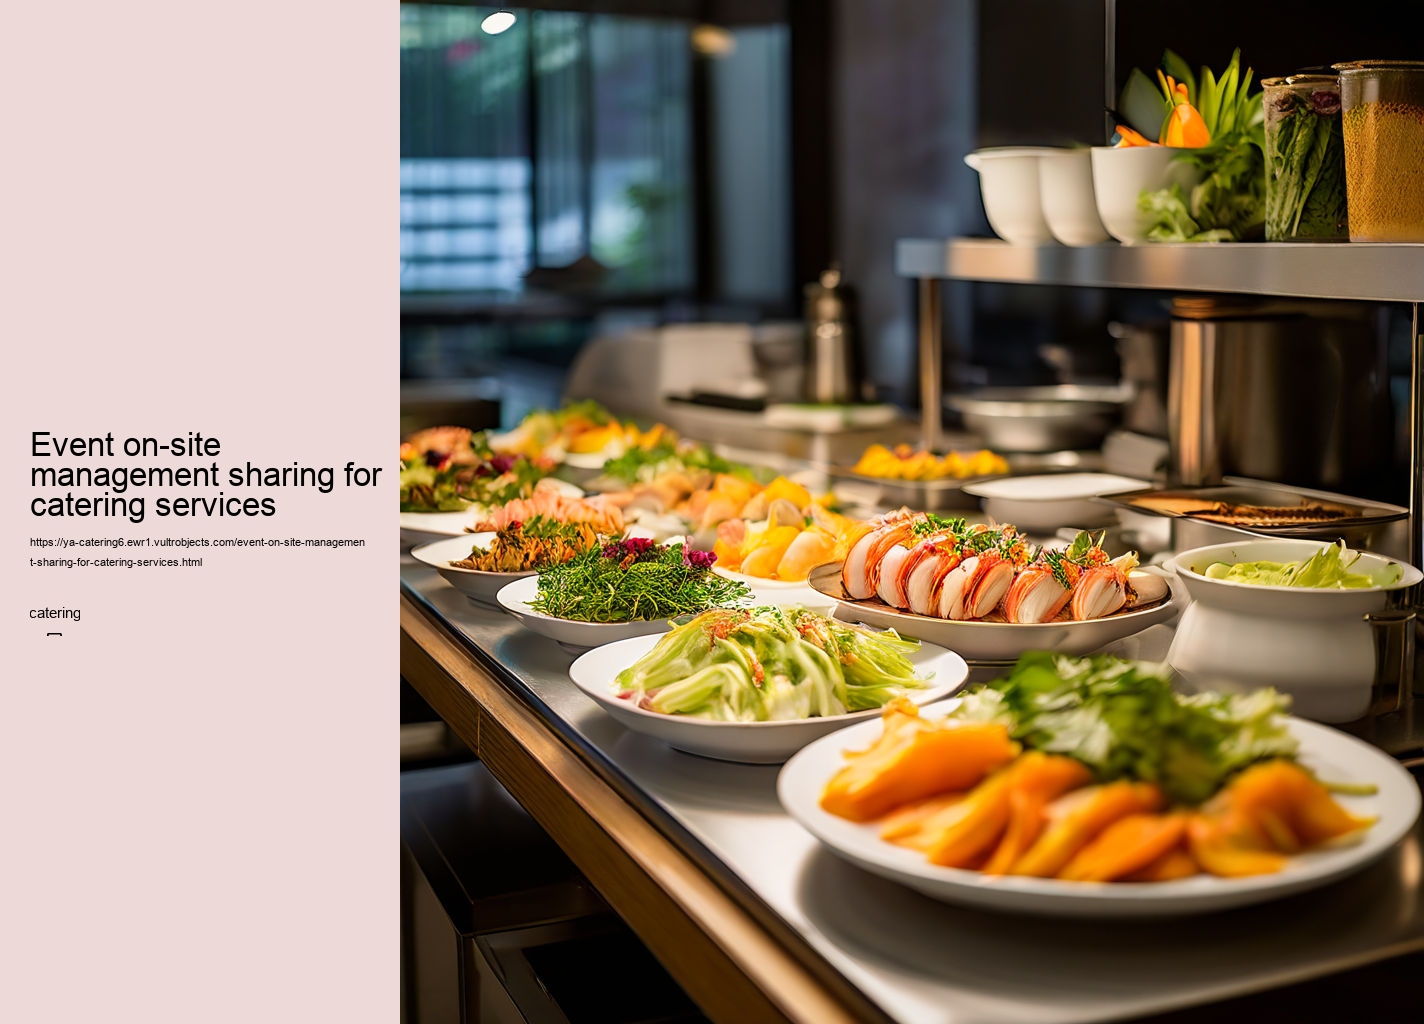 Event on-site management sharing for catering services